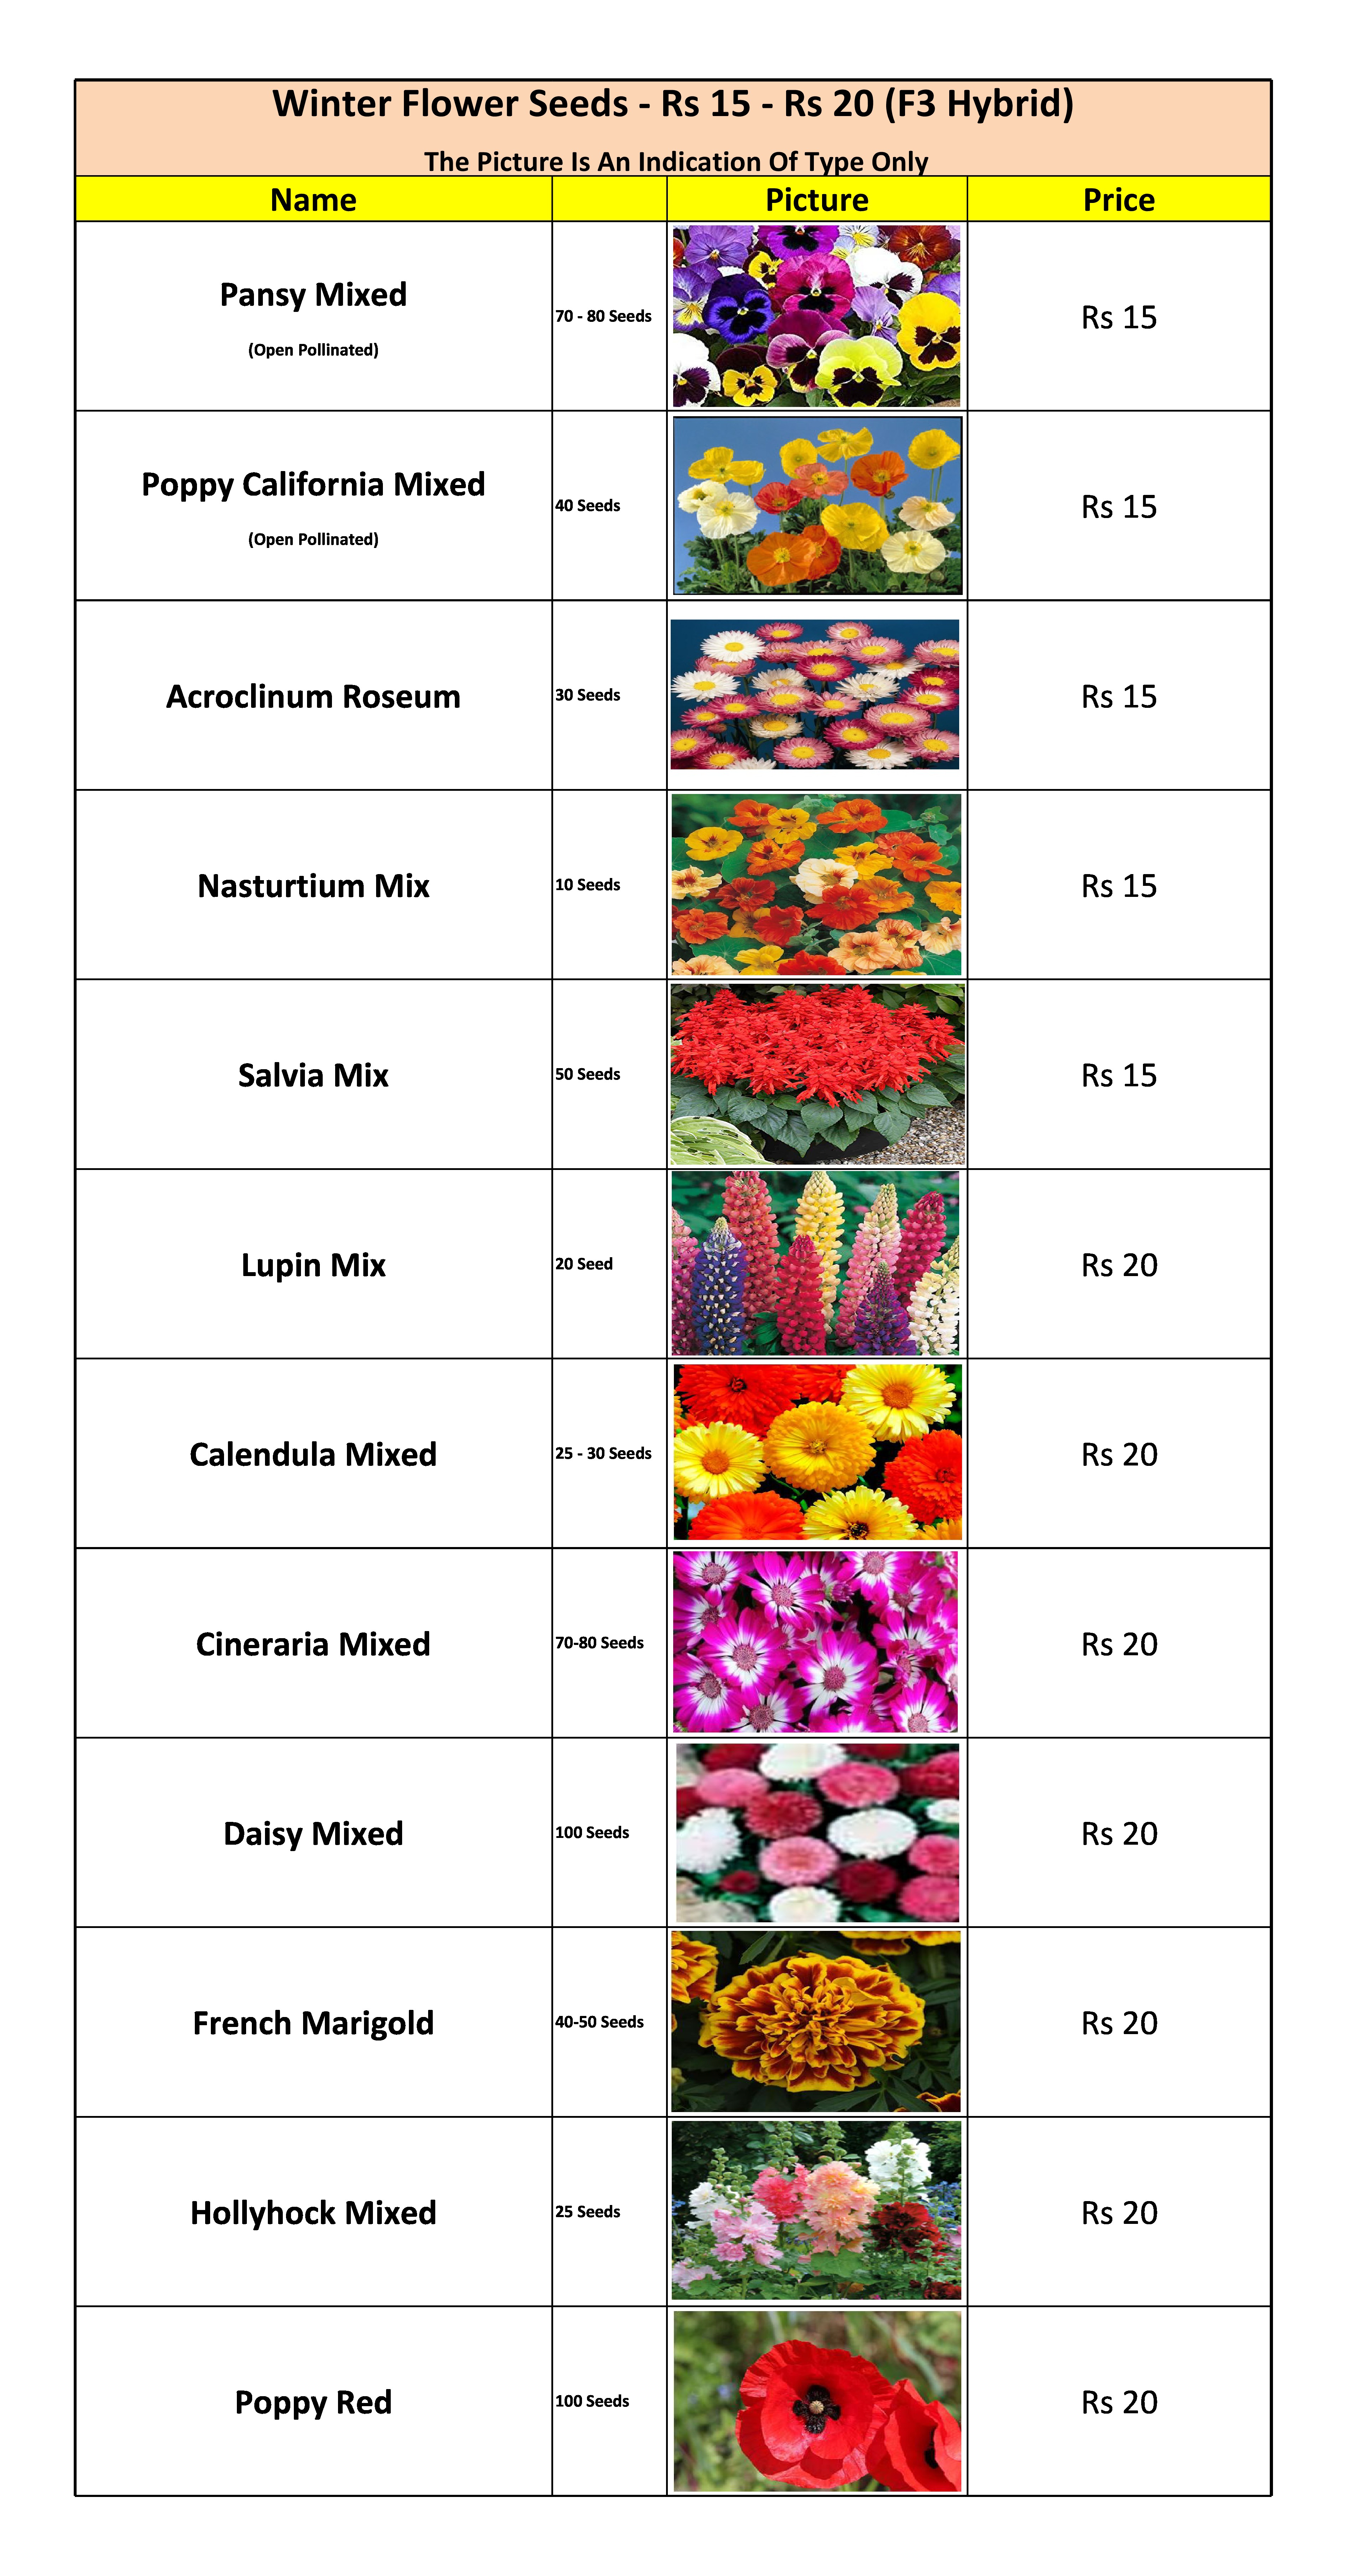 Winter Flower Seeds - Rs 15 & Rs 20